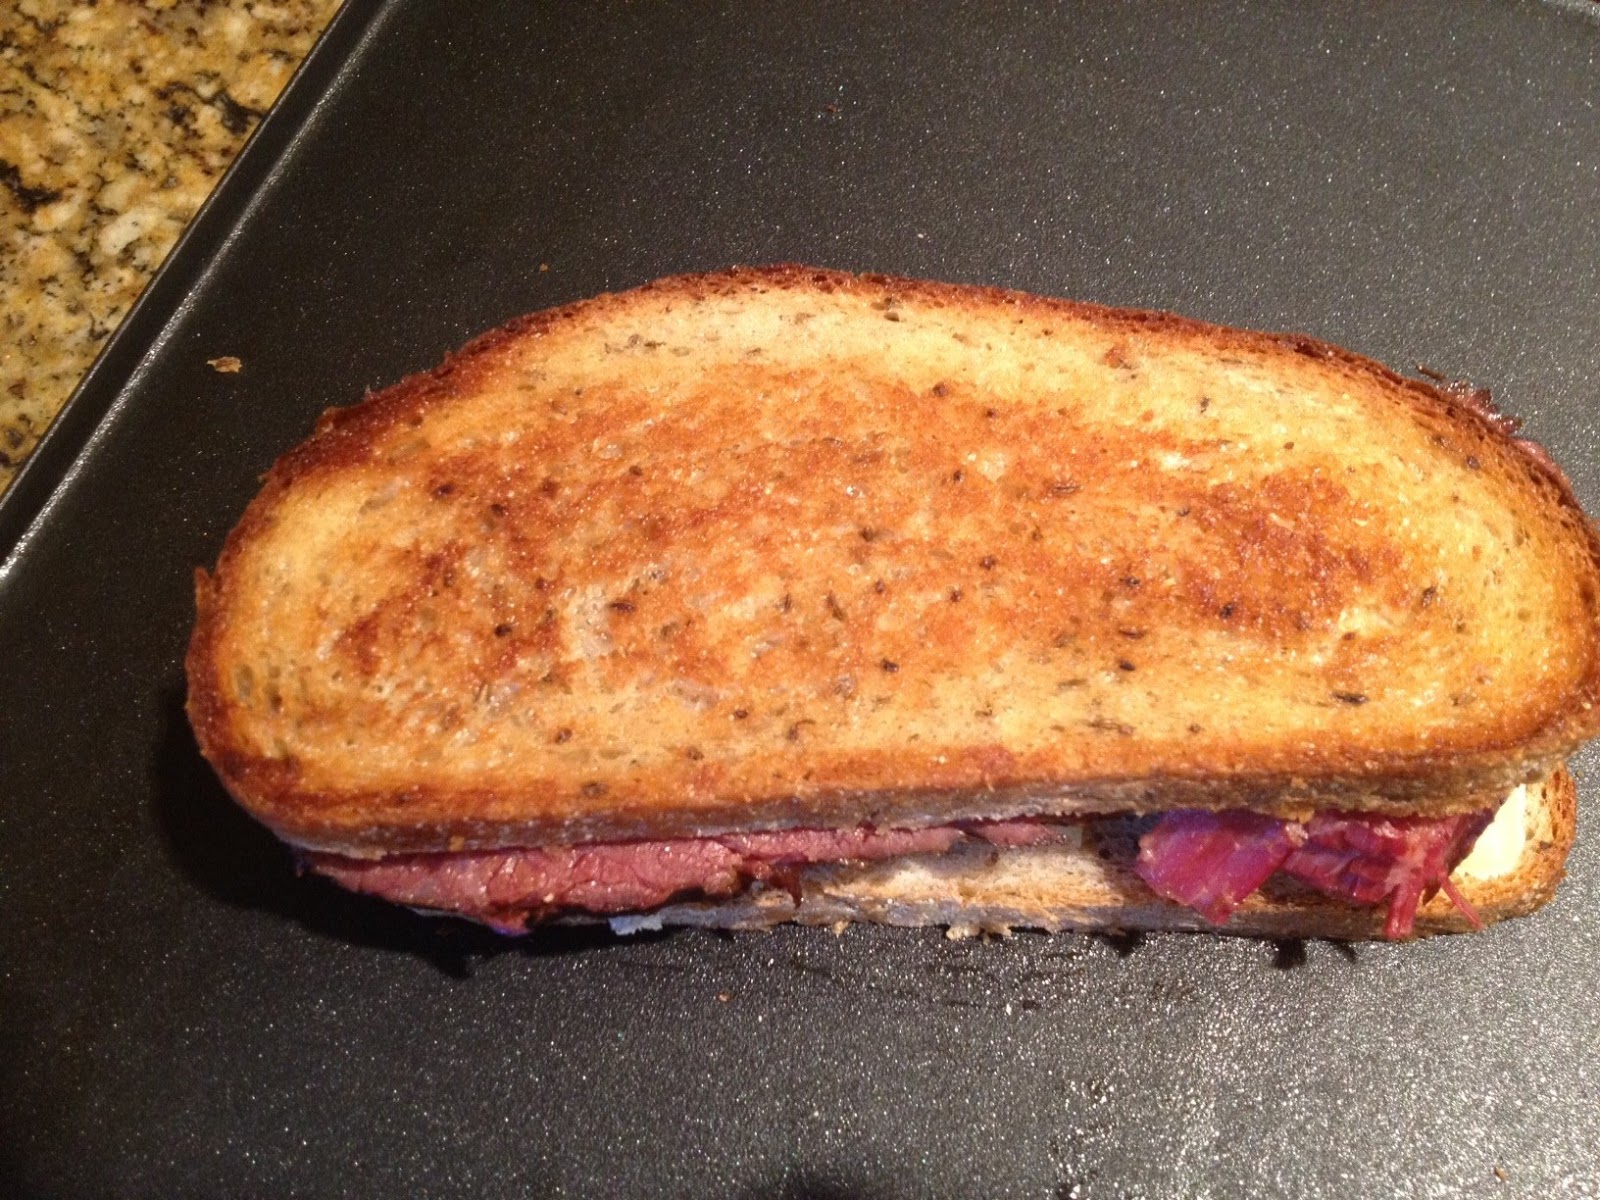 Grilled Smoked Corn Beef &amp; Jarlsberg Cheese sandwiches - Feed Your Soul Too